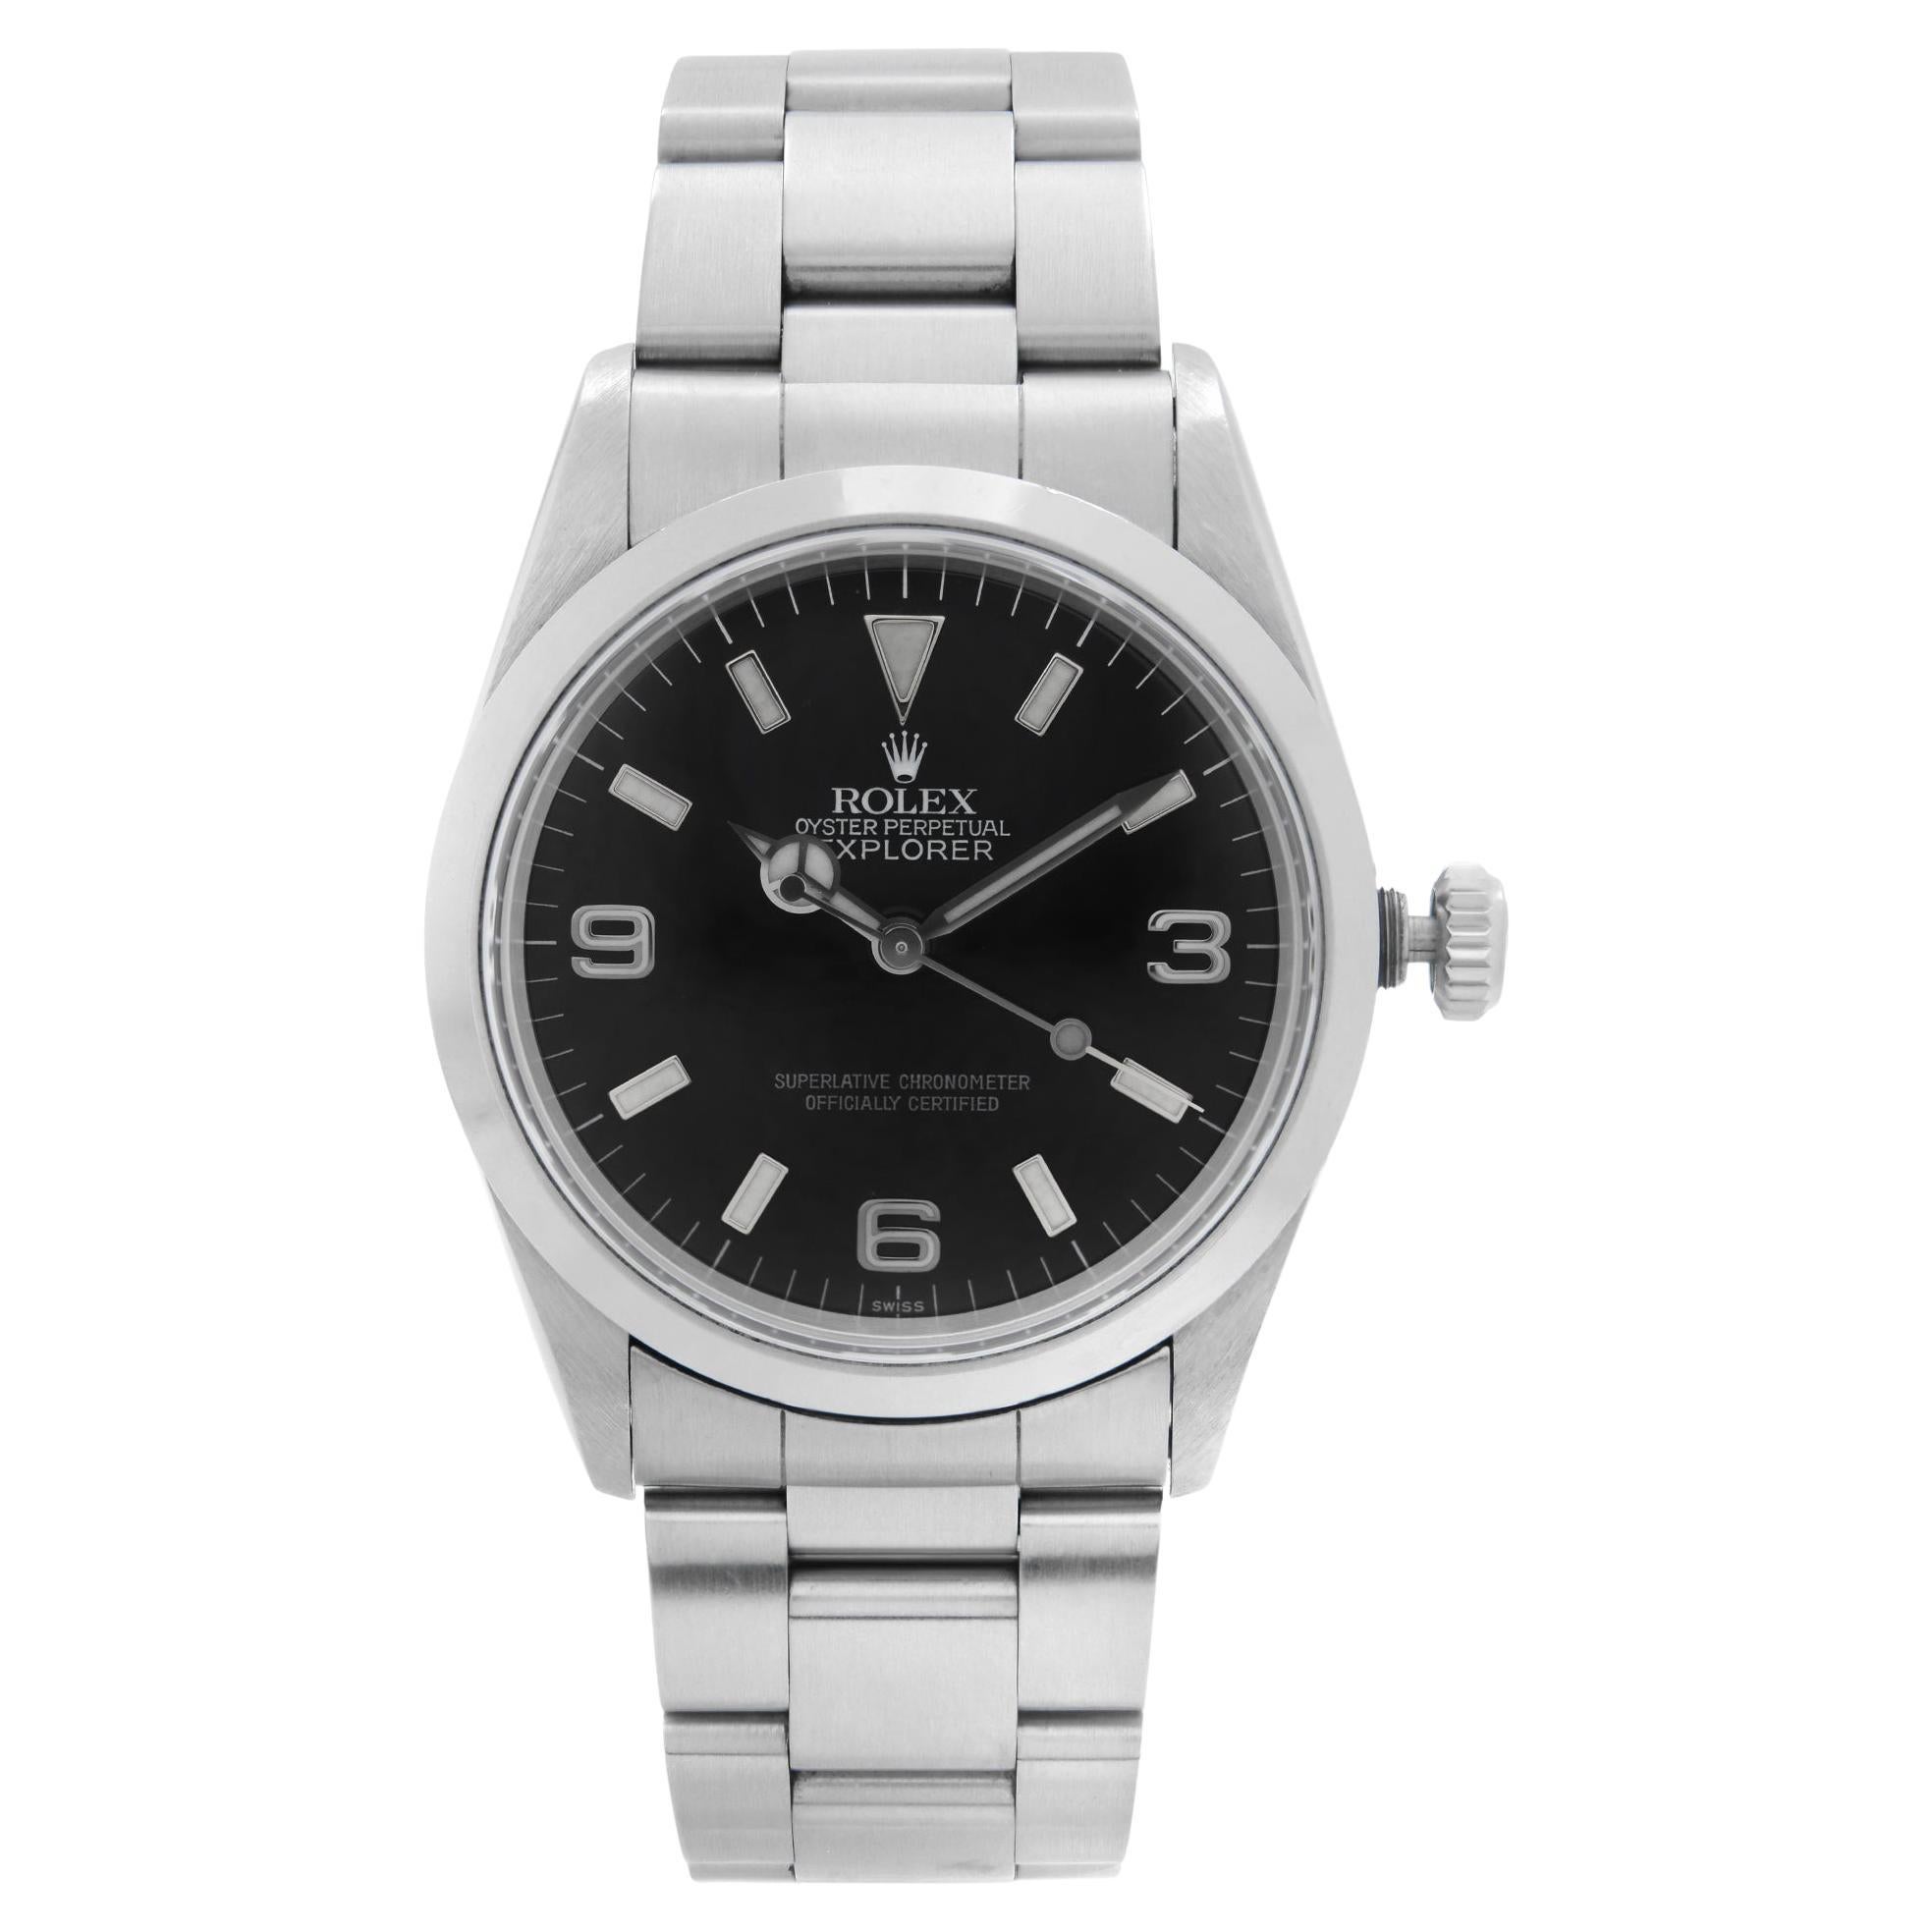 Rolex Explorer 36mm Stainless Steel Black Dial Automatic Mens Watch 14270 For Sale